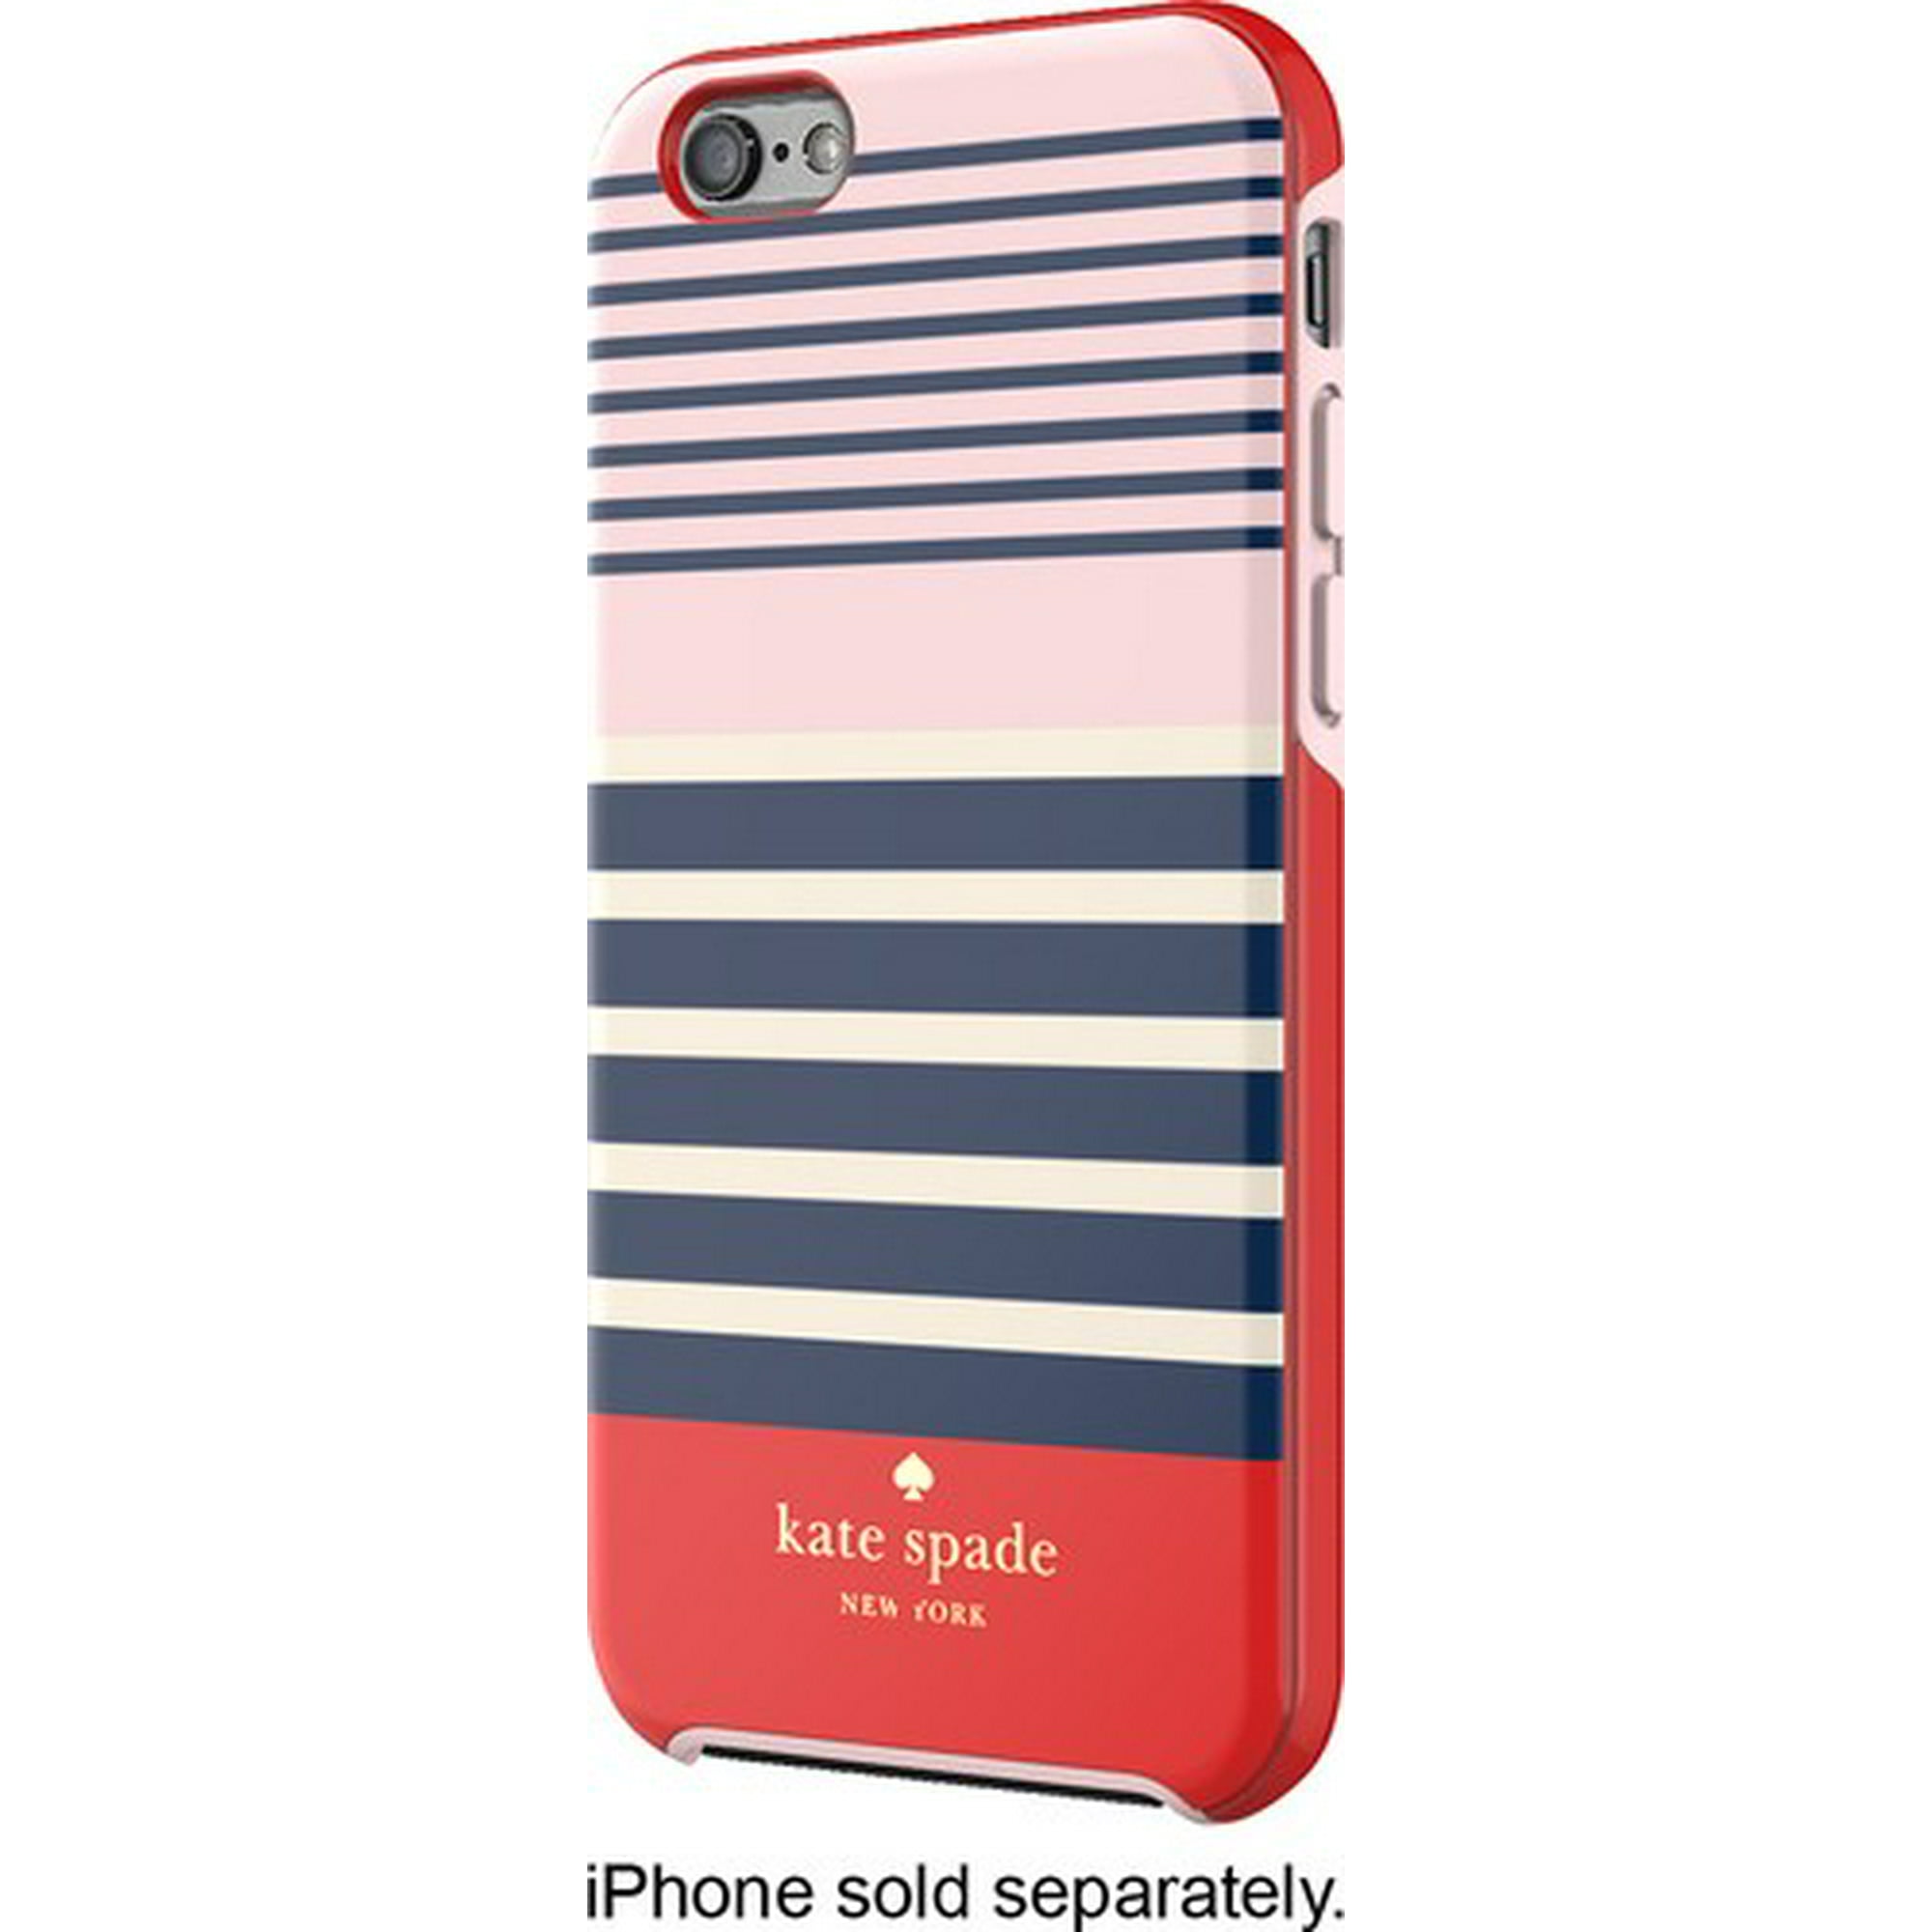 Kate Spade Hybrid Hard Shell Case for Apple iPhone 5/5s - Red/Navy/Blush |  Walmart Canada